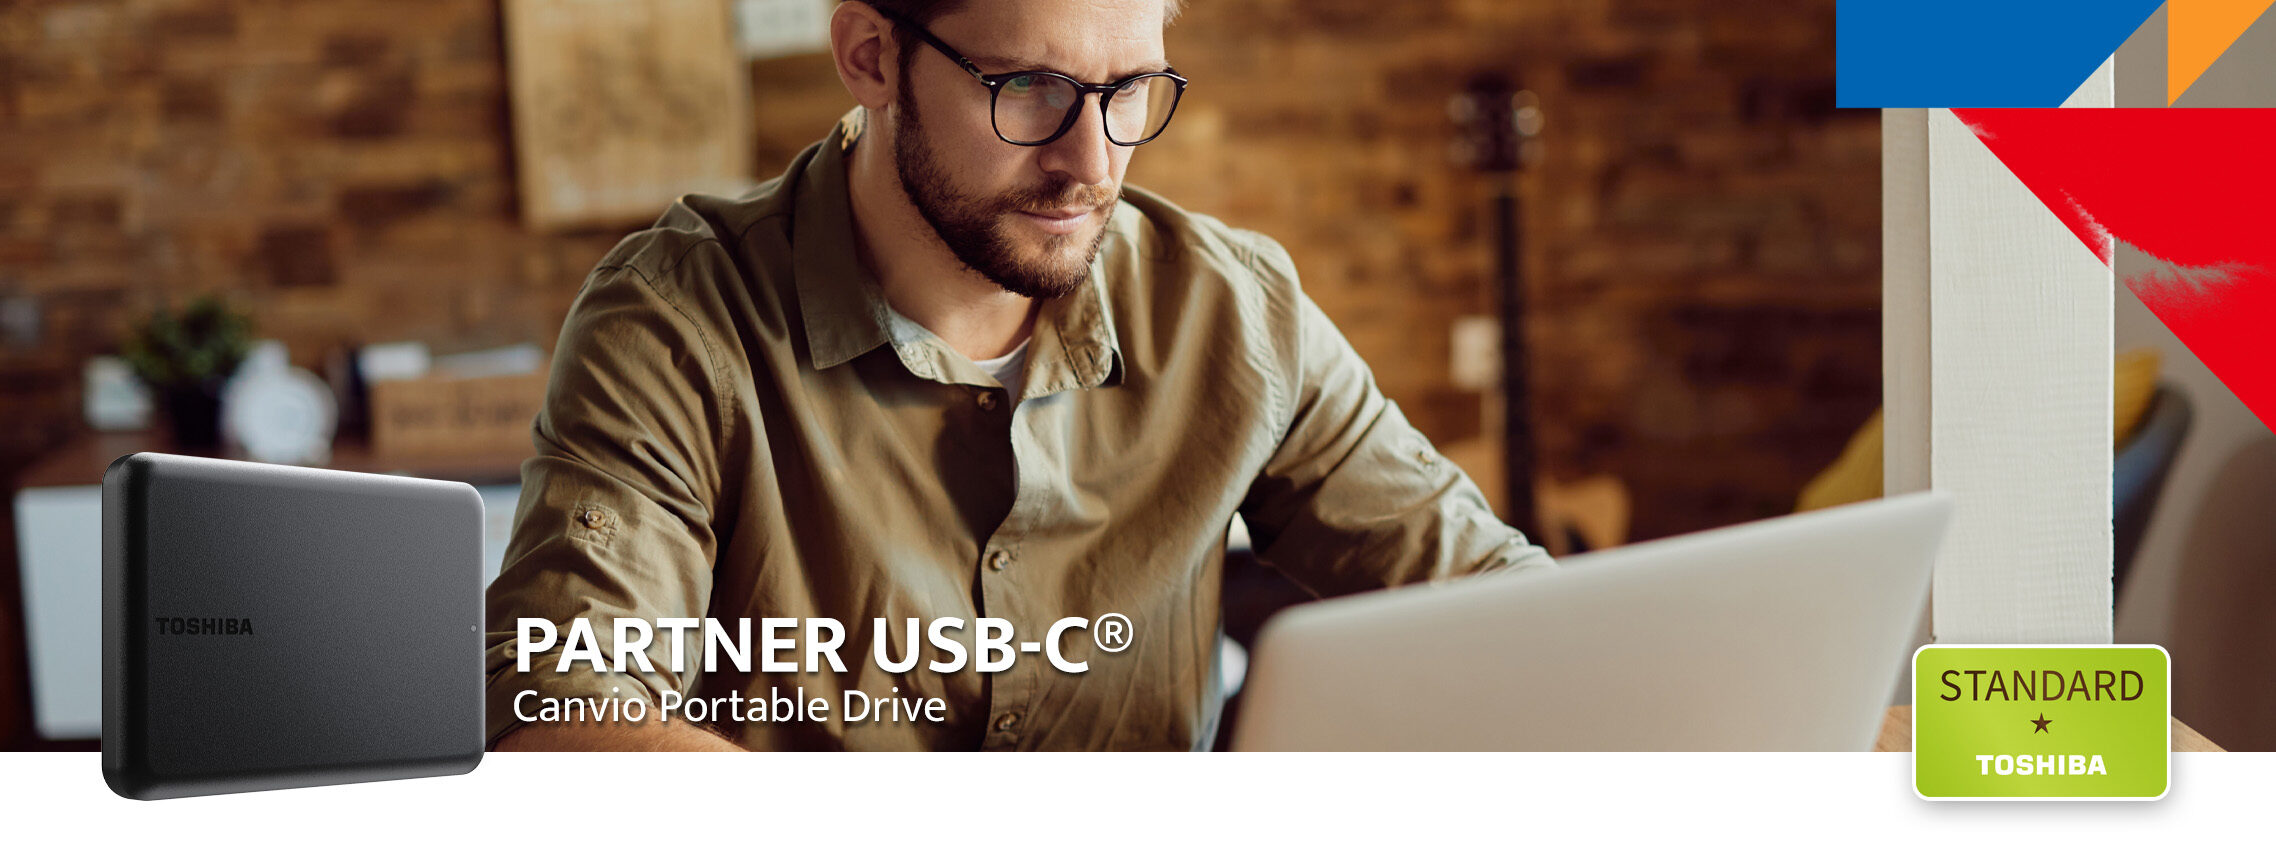 Ext_PRODUCT_PAGE_Partner_USBC_Header